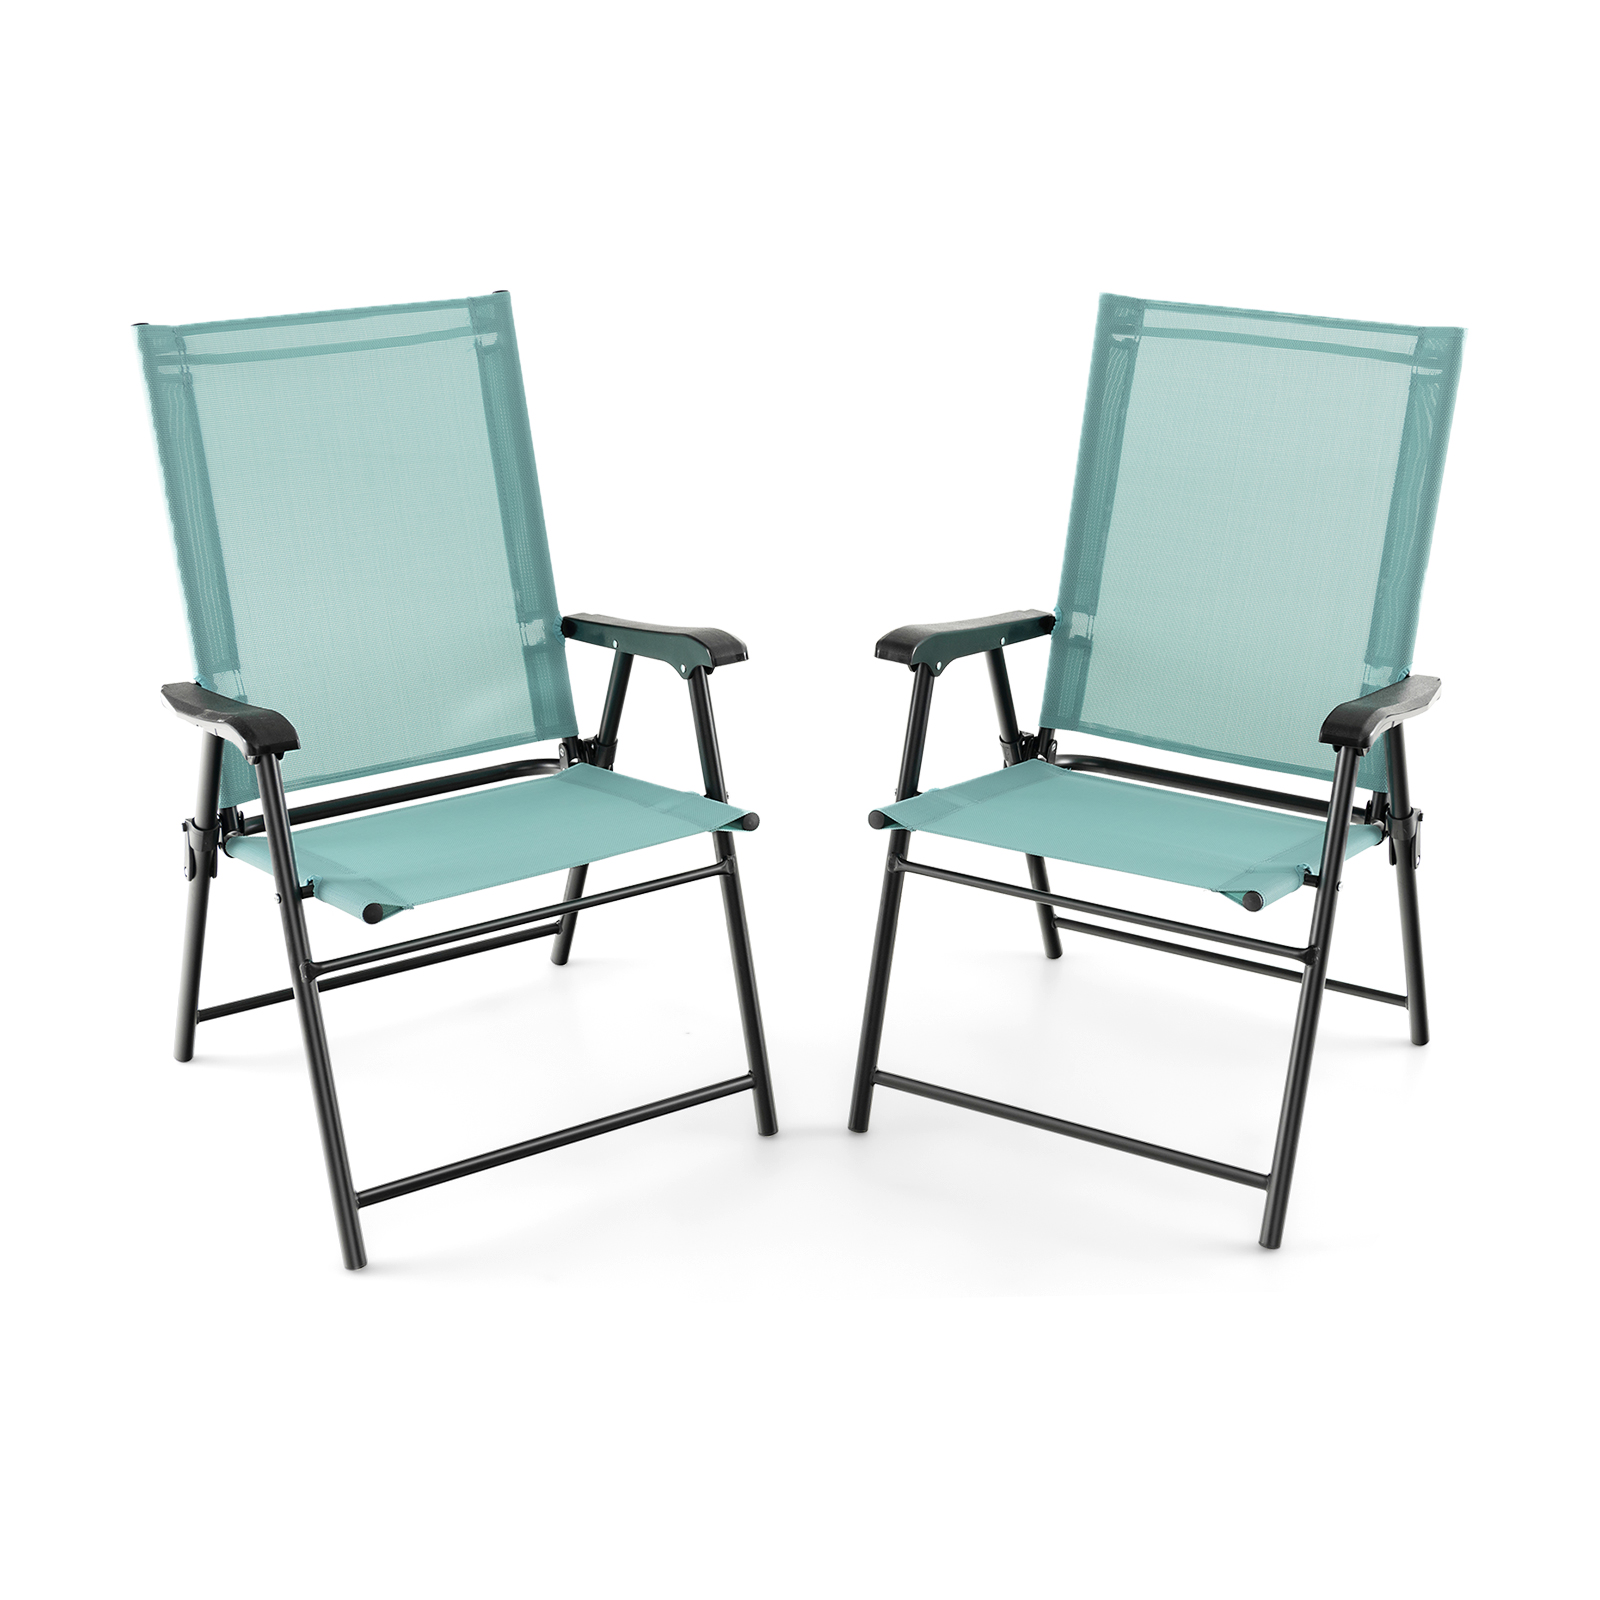 Set of 2 Folding Garden Chairs with Armrests for Yard Lawn Poolside-Green